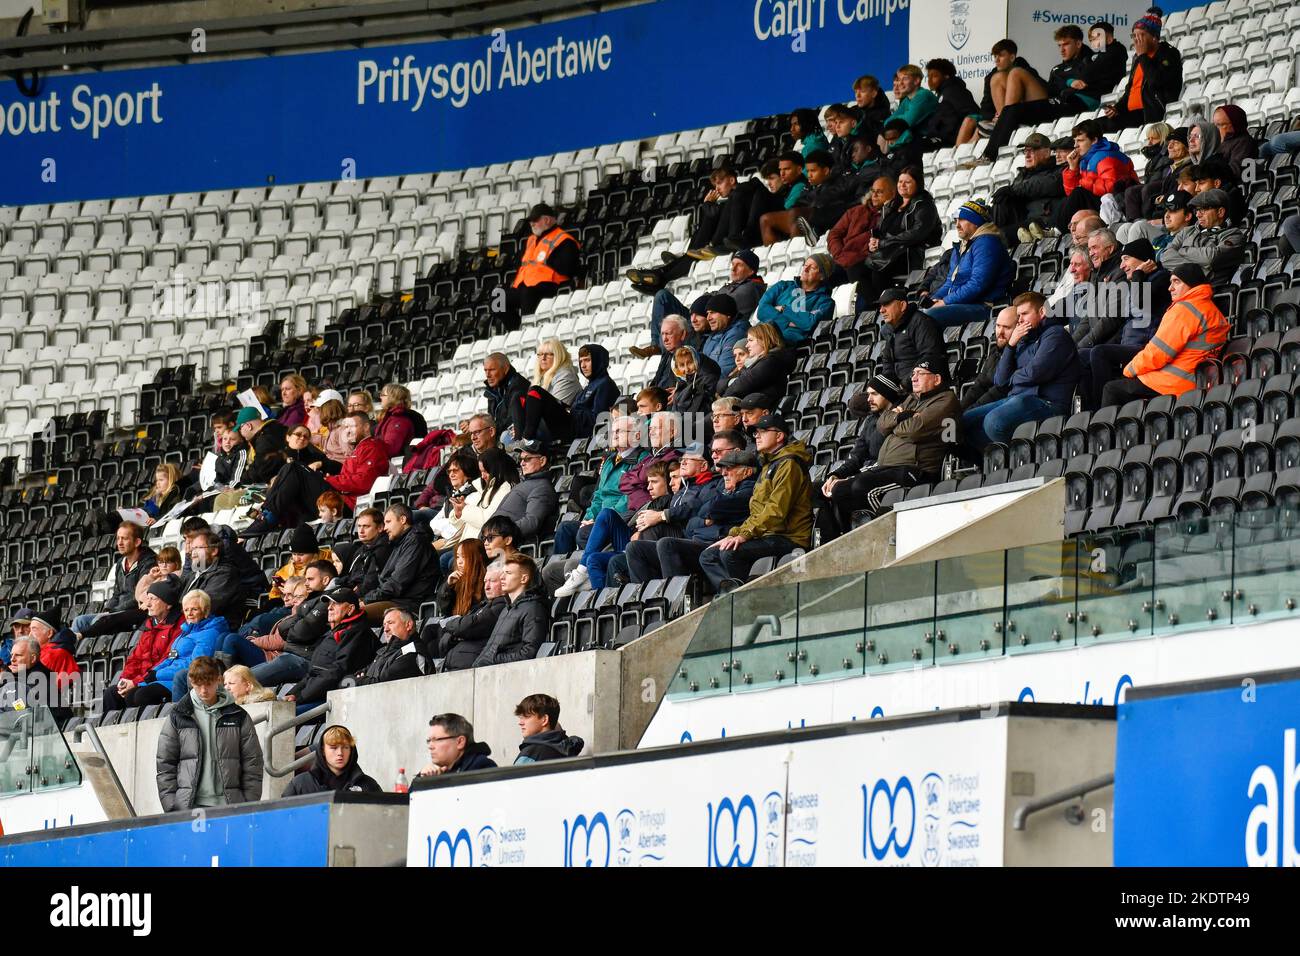 Swansea, Wales. 8 November 2022. The crowd during the Professional Development League game between Swansea City Under 21 and Queens Park Rangers Under 21 at the Swansea.com Stadium in Swansea, Wales, UK on 8 November 2022. Credit: Duncan Thomas/Majestic Media/Alamy Live News. Stock Photo